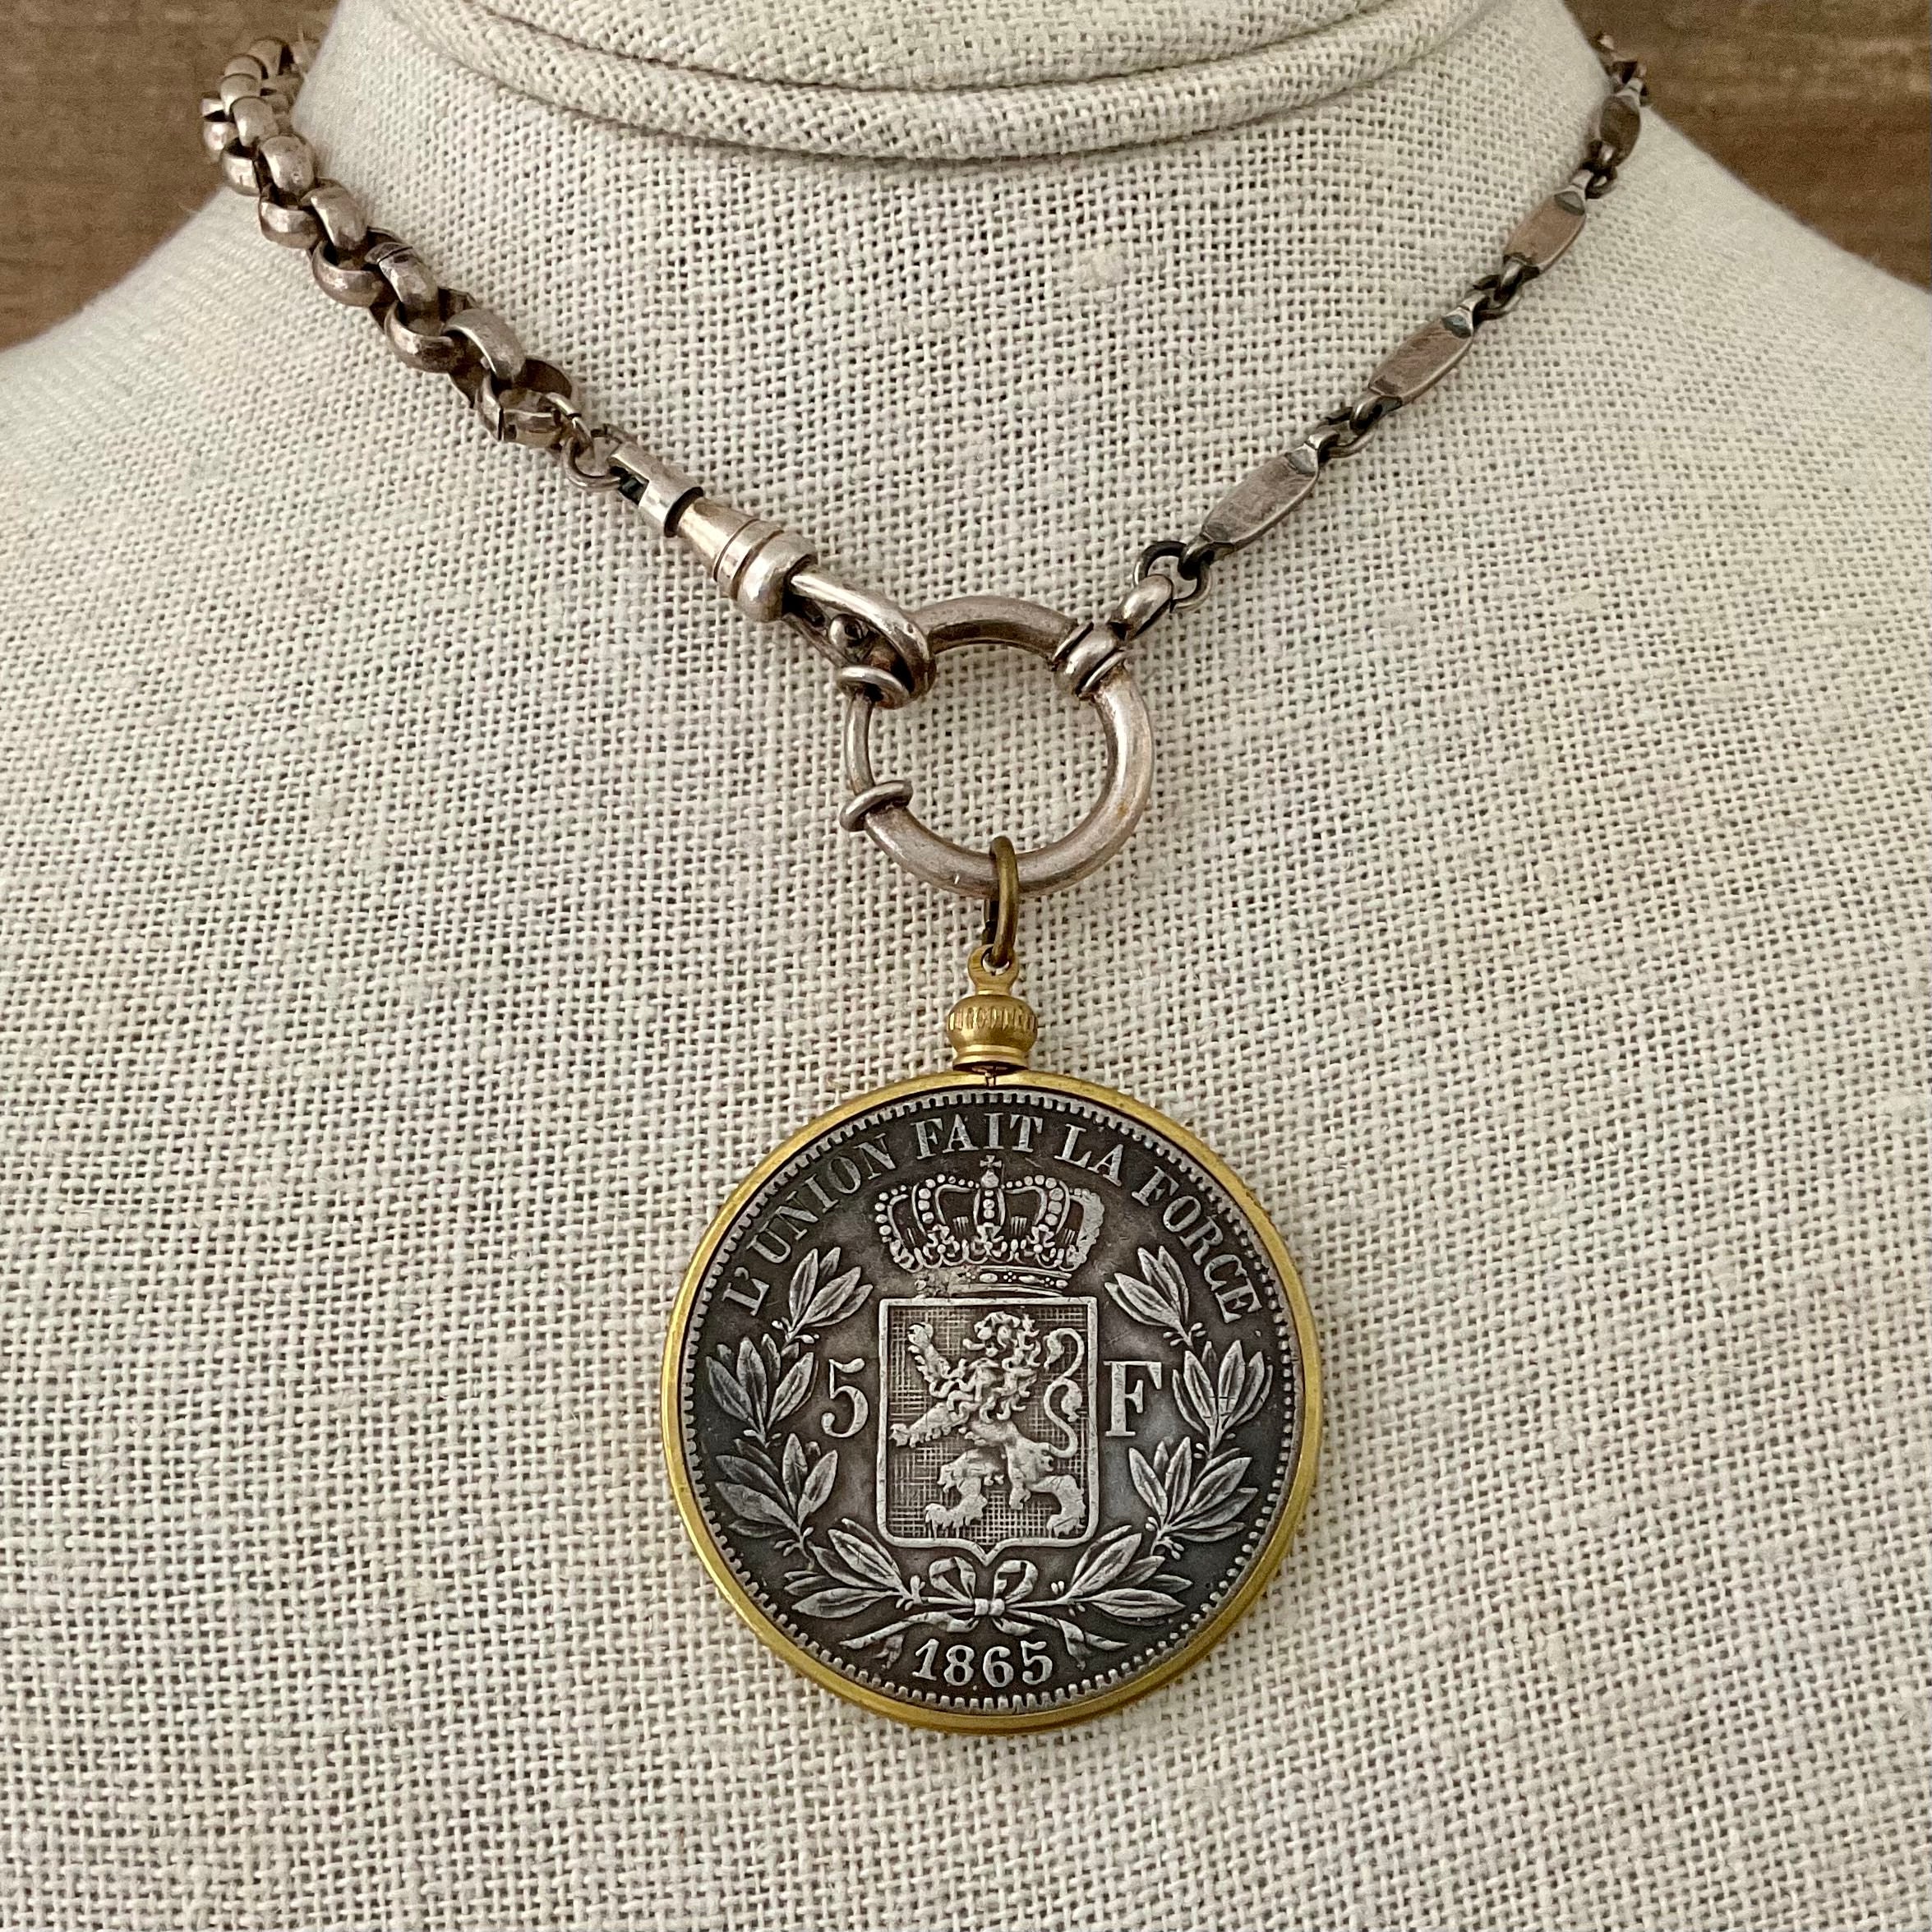 Vintage Sterling Chain with Belgian Coin Circa 1865